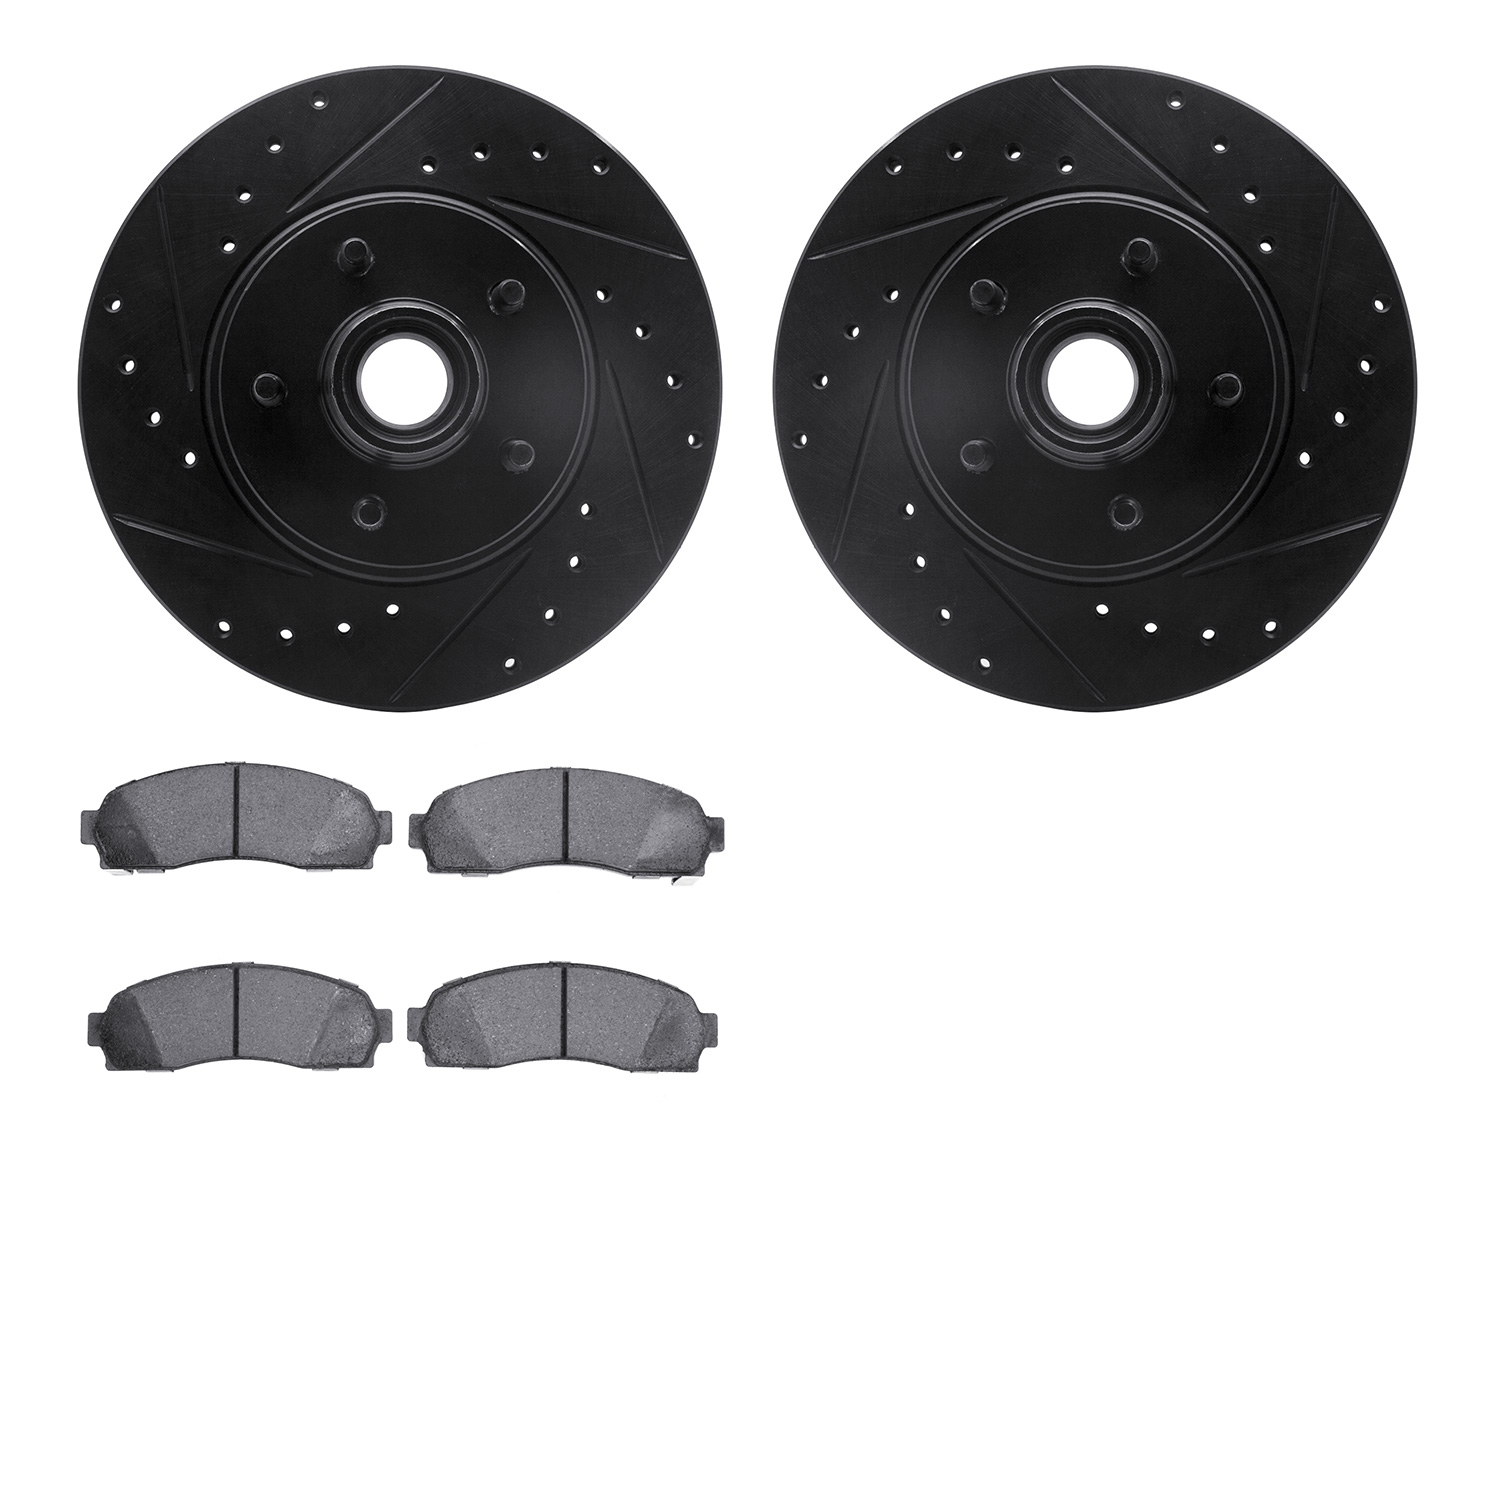 8402-54030 Drilled/Slotted Brake Rotors with Ultimate-Duty Brake Pads Kit [Black], 2003-2011 Ford/Lincoln/Mercury/Mazda, Positio